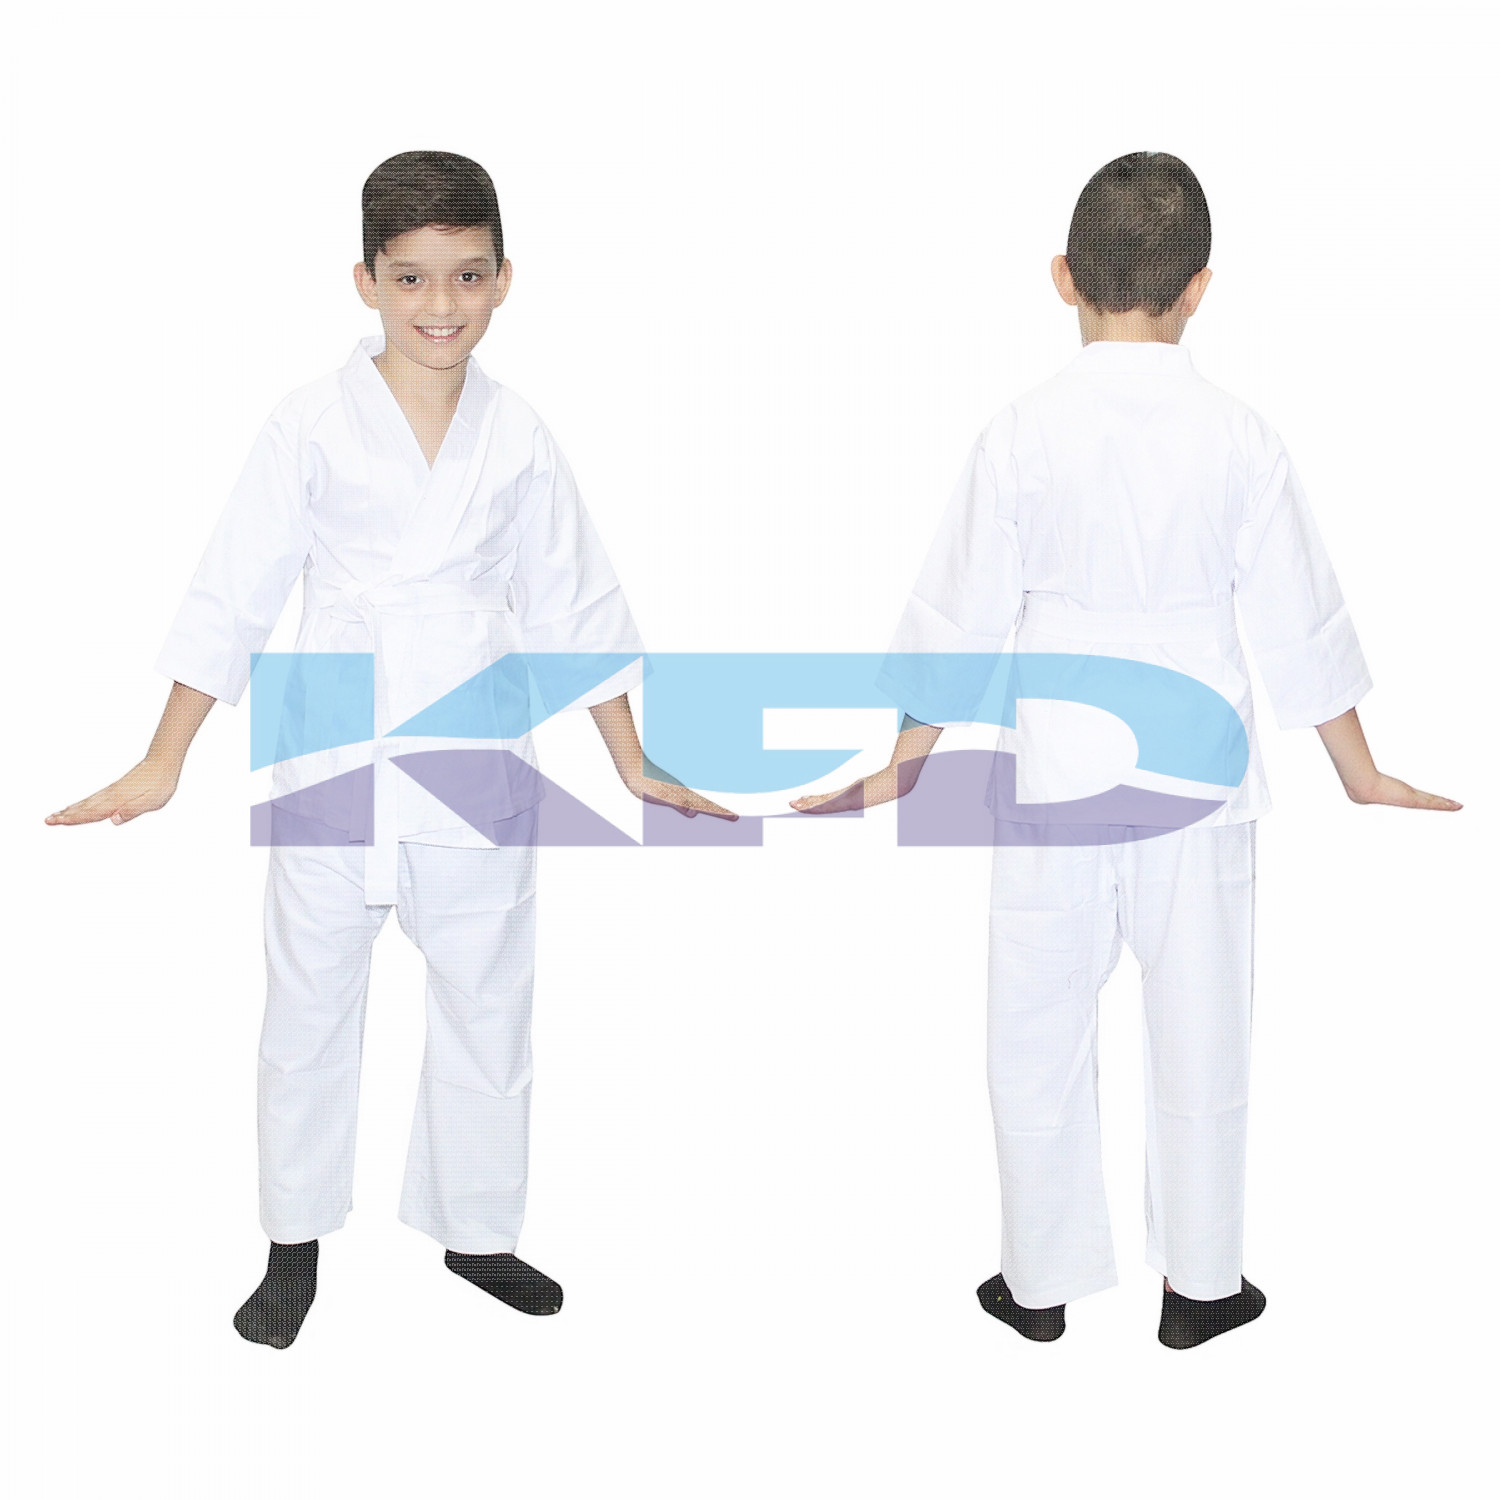 Karate fancy dress for kids,Martial Art/Fighting Costume for School Annual function/Theme Party/Competition/Stage Shows Dress